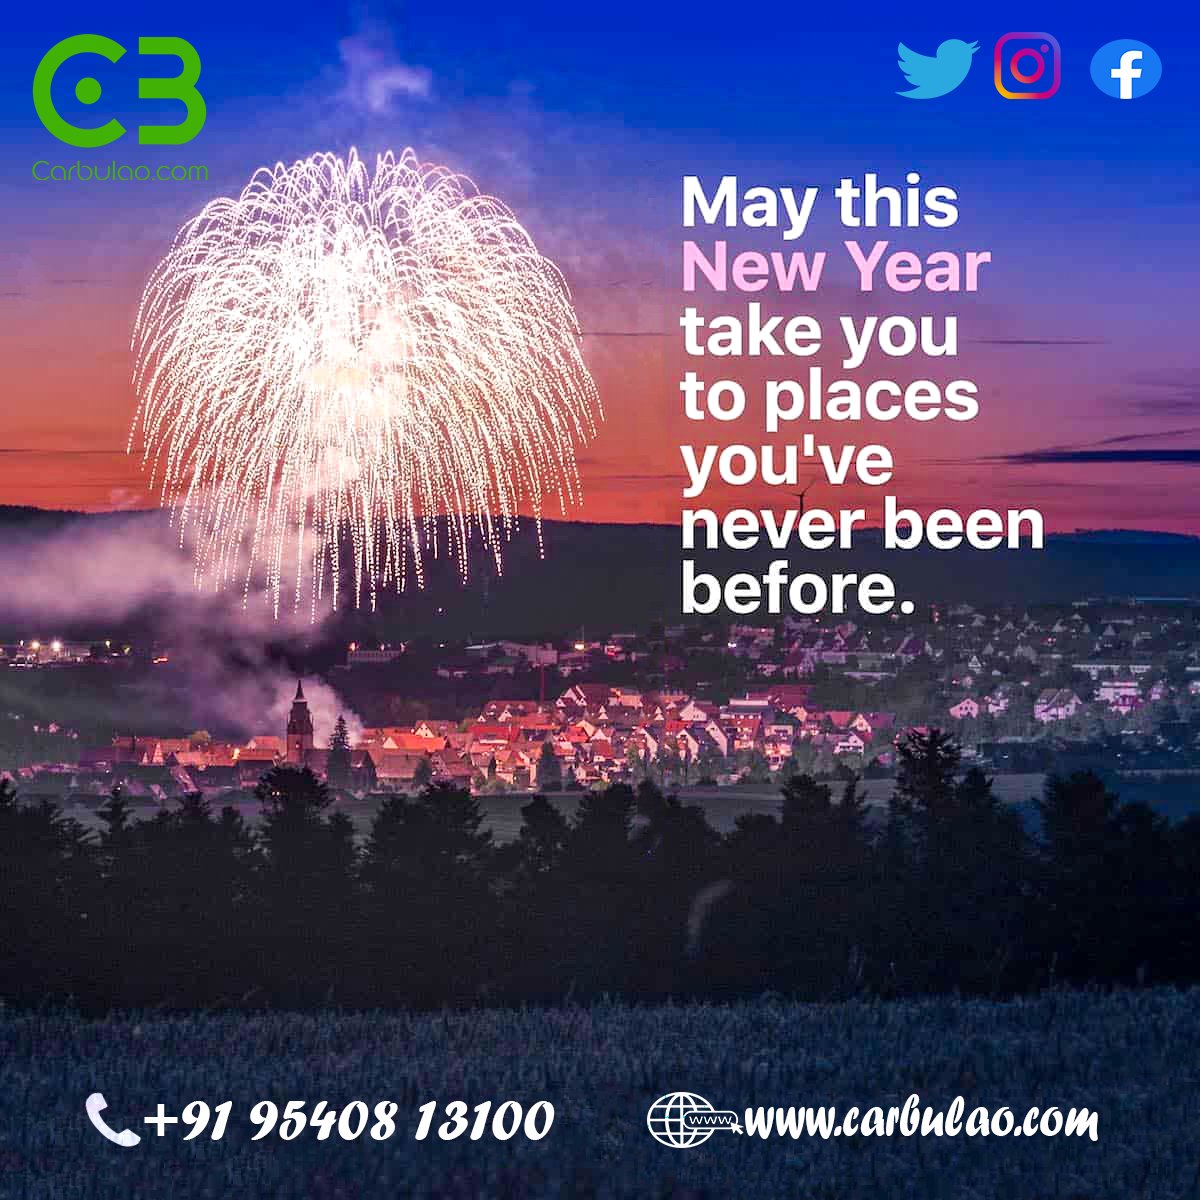 Happy New Year 2023😍

#happynewyear2023 #newyear #carbulao #carbulaoghumnejao #traveltime #trip #tourist #partytime #travelblog #taxibooking #taxiingurgaon #cab #cabforoutstation #cabbooking #cabservice #cabhire #travelreels